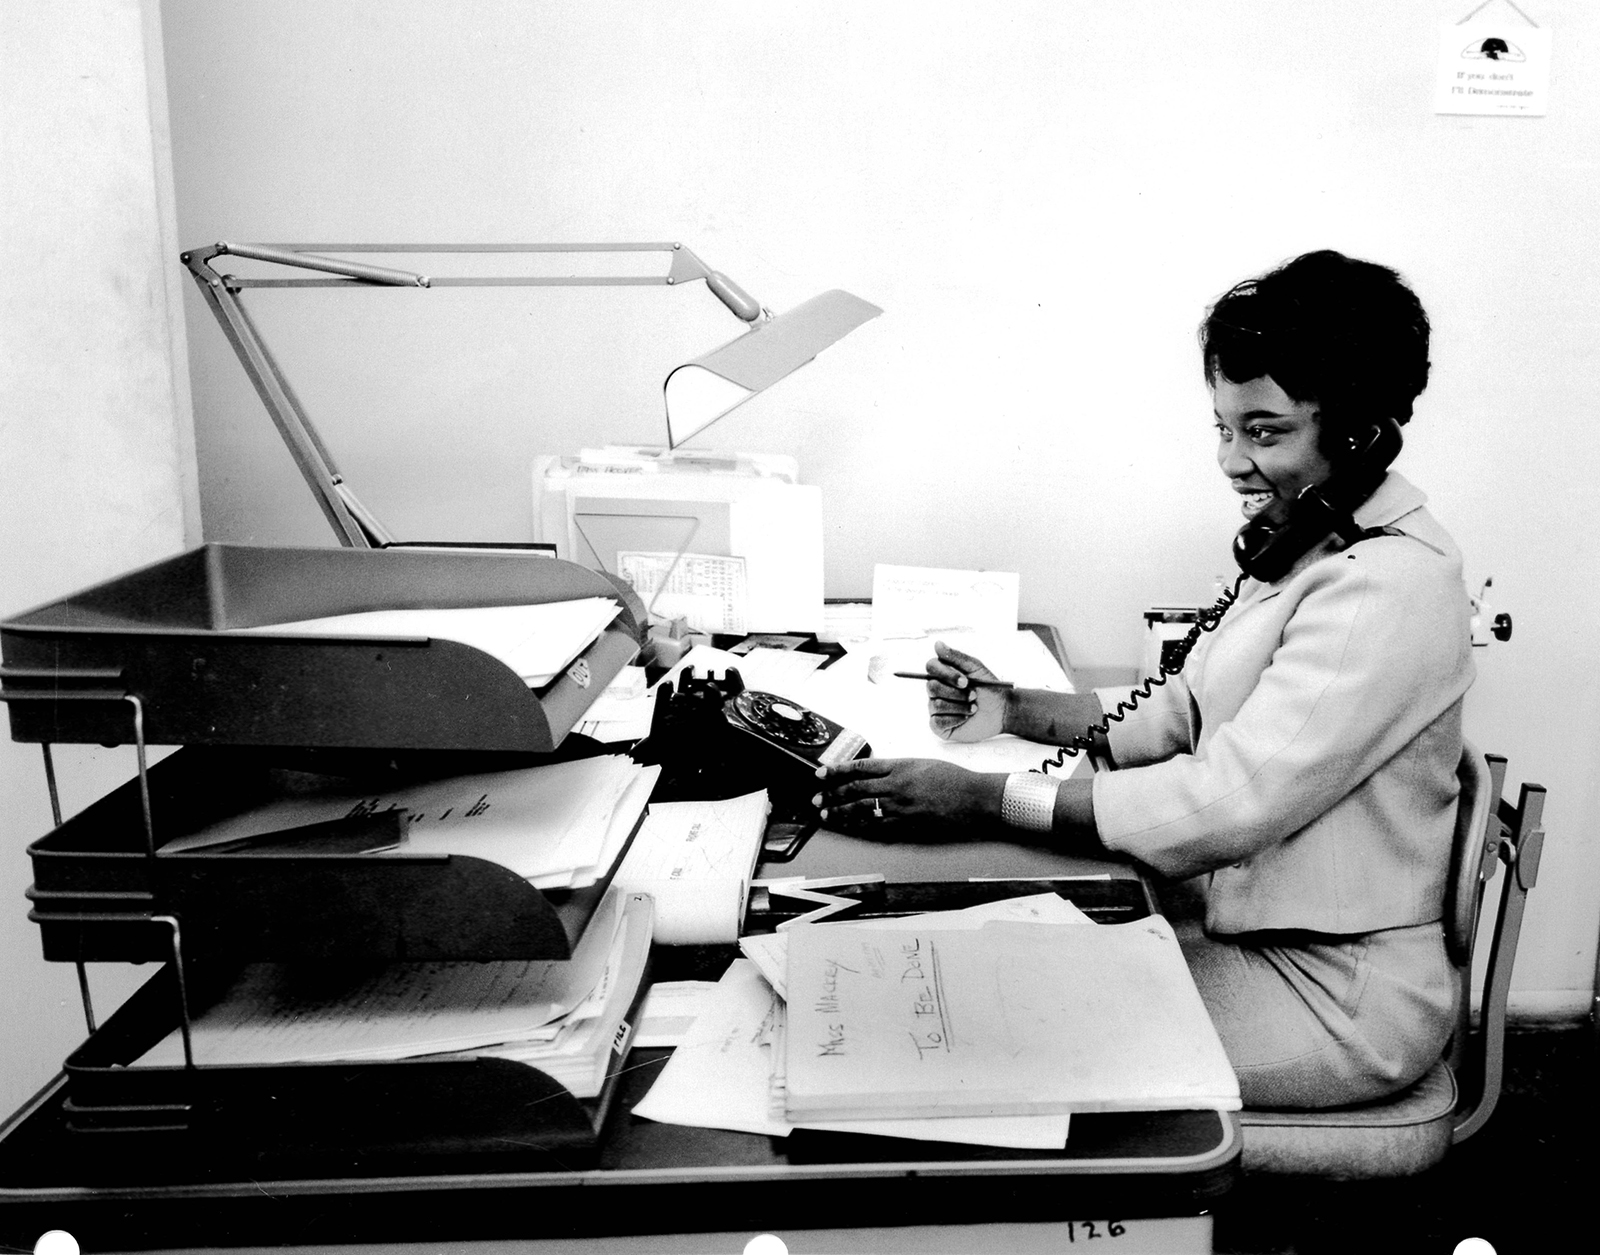 Willie Pearl Mackey King at her desk at the Southern Christian Leadership Conference office in Atlanta in 1963. Photo courtesy Willie Pearl Mackey King